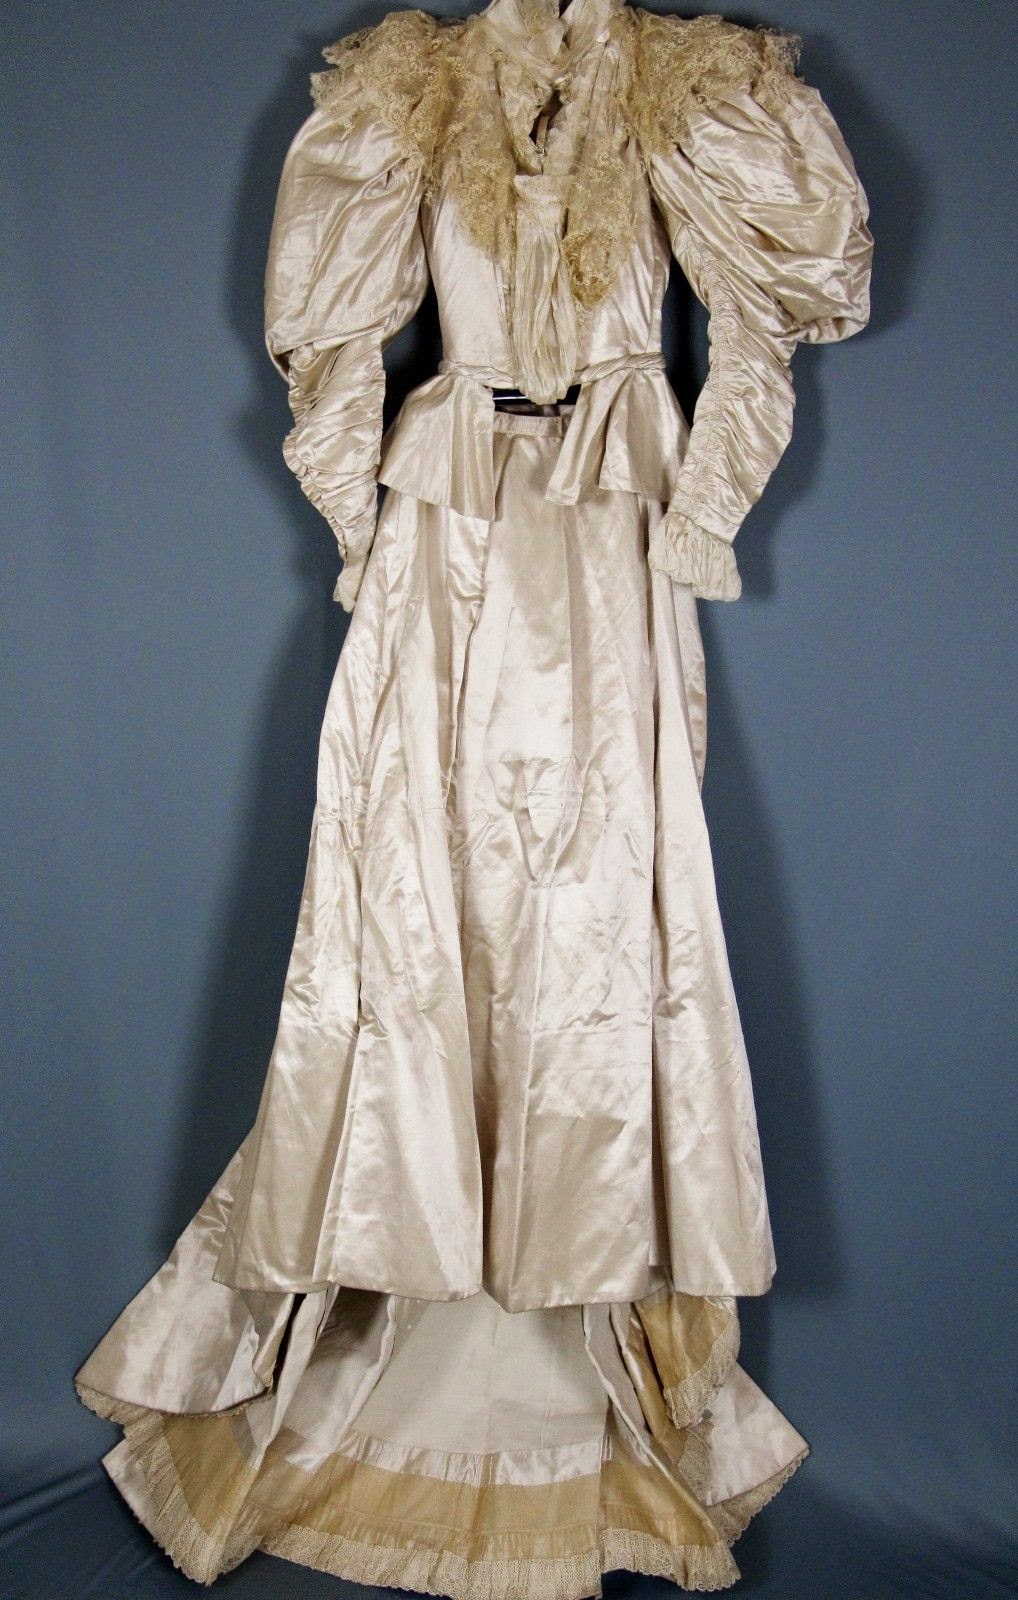 All The Pretty Dresses: 1896 Wedding Gown